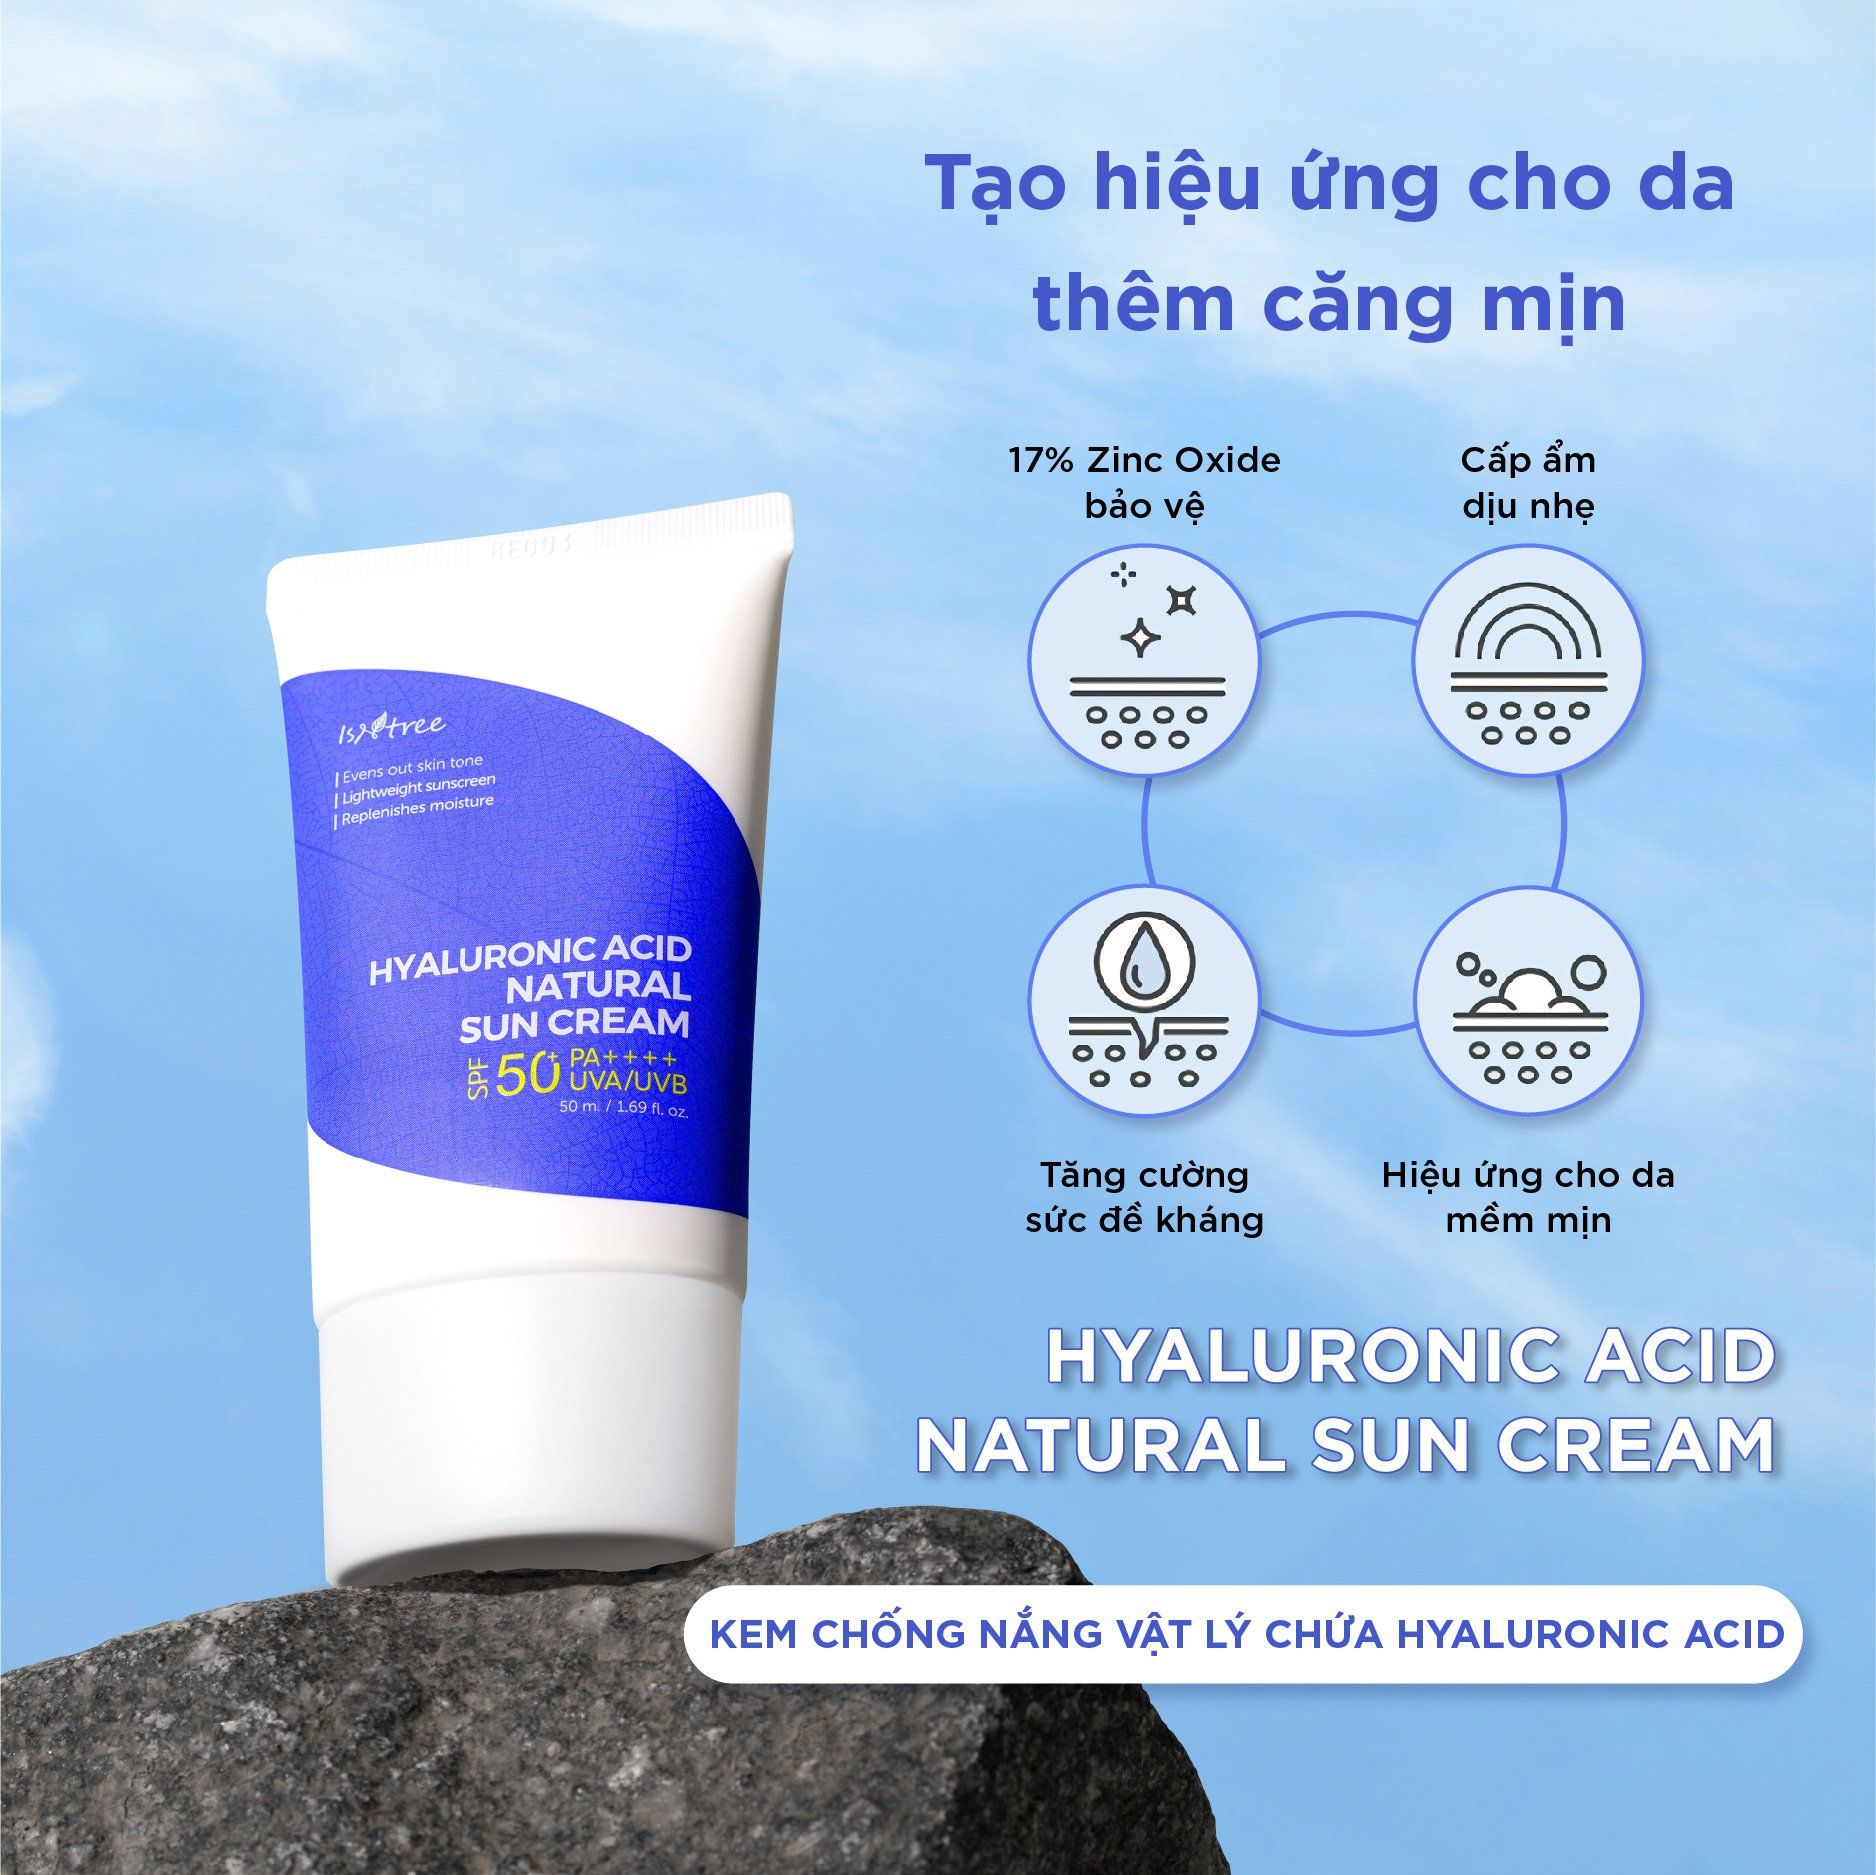 Kem Chống Nắng ISNTREE Hyaluronic Acid Natural Sun Cream – Lam Thảo Cosmetics